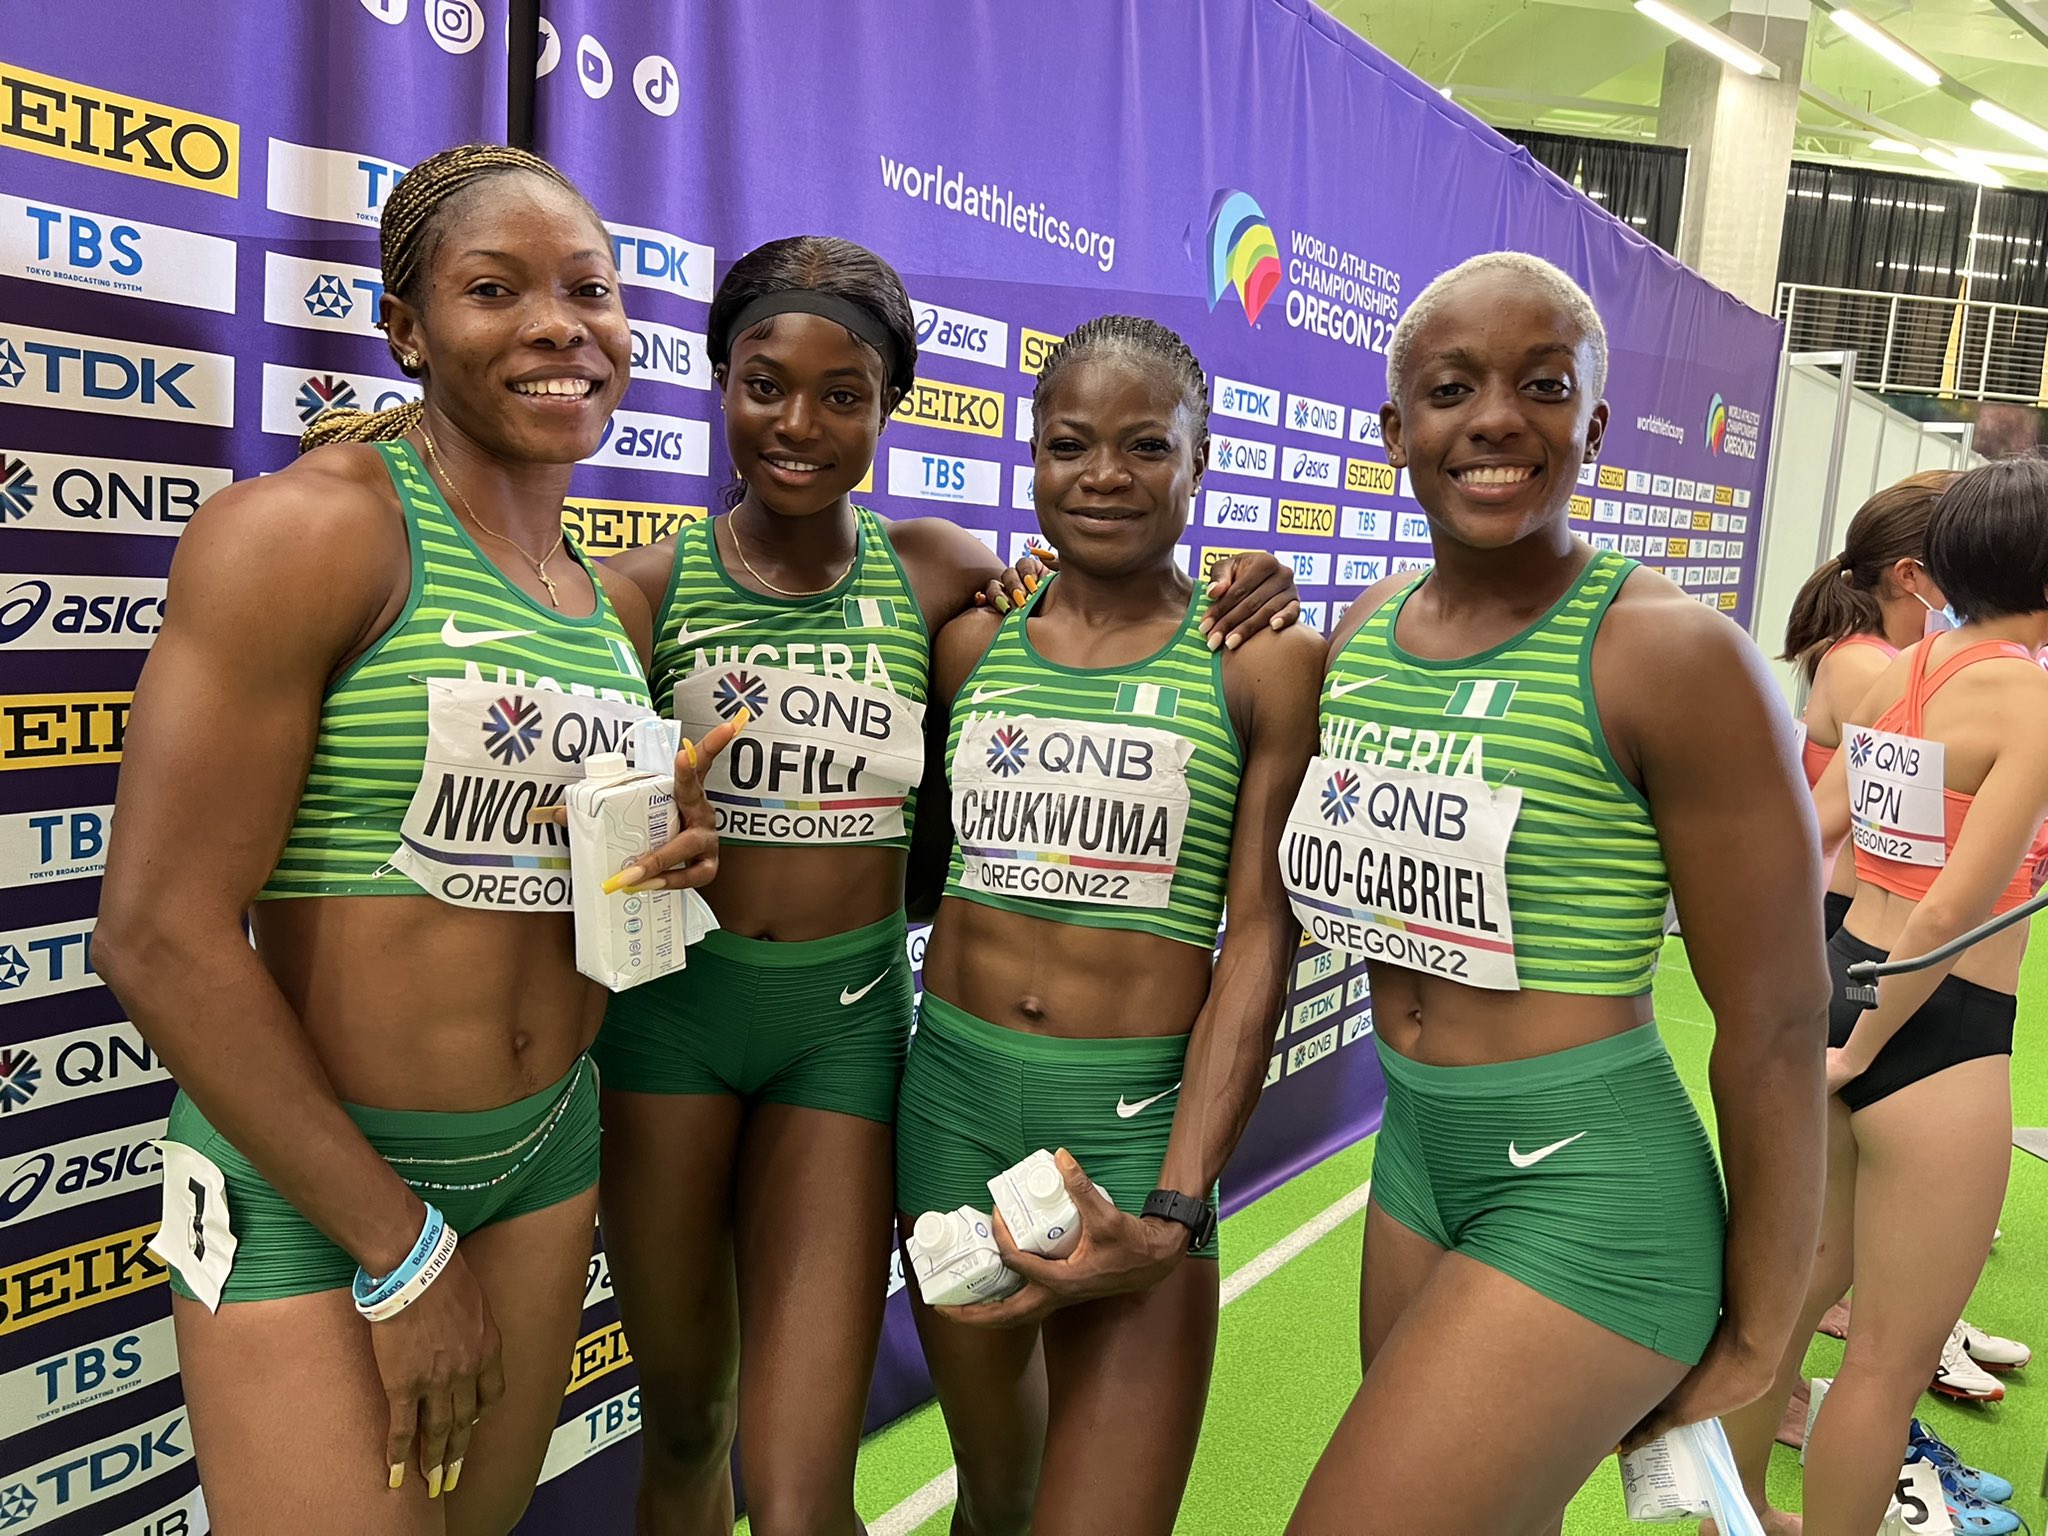 Oregon 2022: New African Record Not Enough As Nigerian Team Finishes 4th In Women’s 4x100m